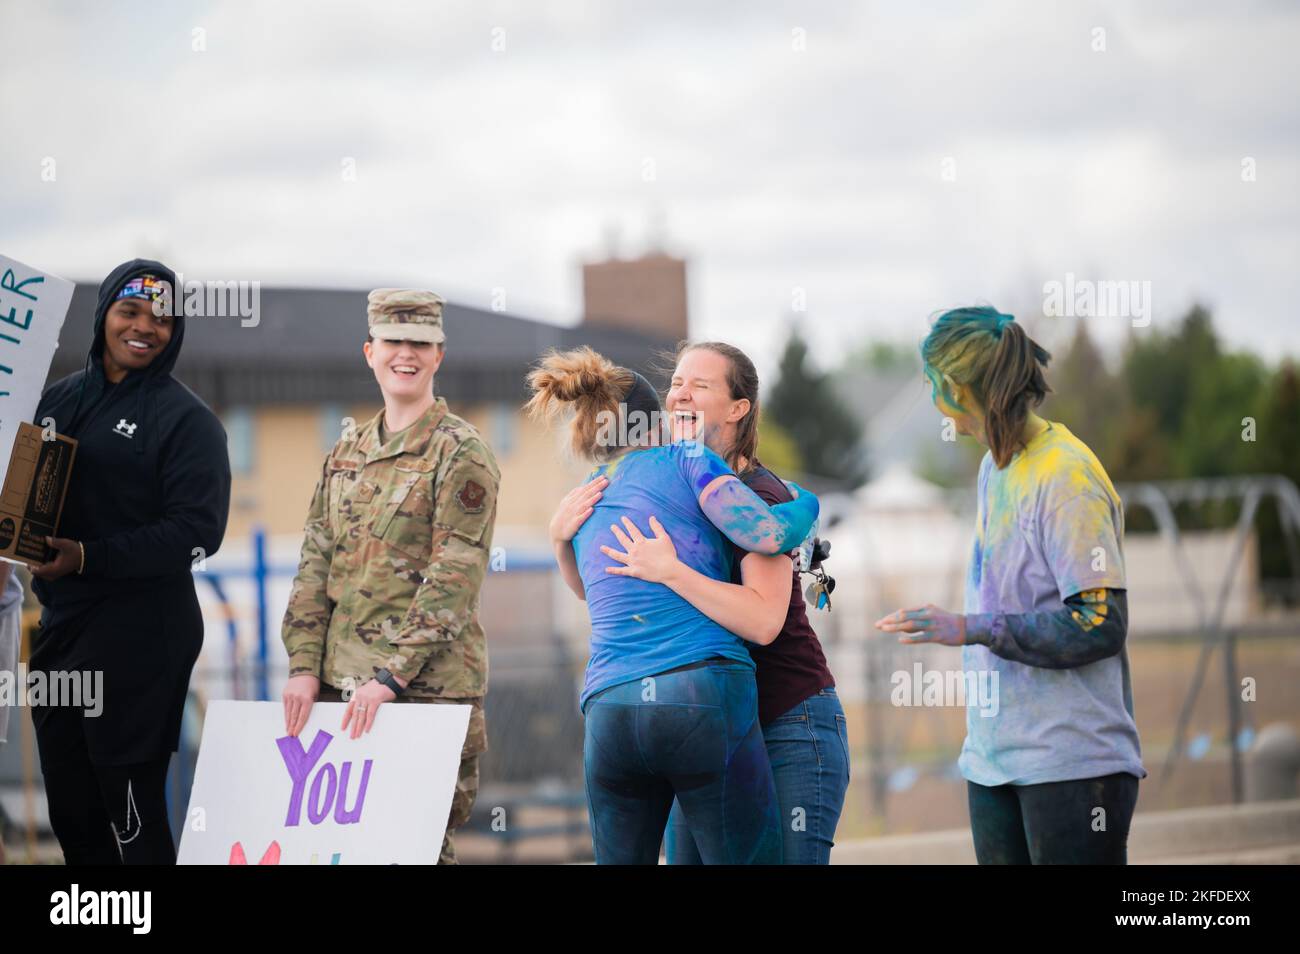 Col. Corrie Pecoraro, 341st Force Support Squadron commander, hugs Serena Sargent, 341st Missile Wing violence prevention integrator, after crossing the finish line during a Suicide Awareness Color Run Sept. 9, 2022, at Malmstrom Air Force Base, Mont. The run was organized to share messages of hope, increase resilience and provide information about available resources. Stock Photo